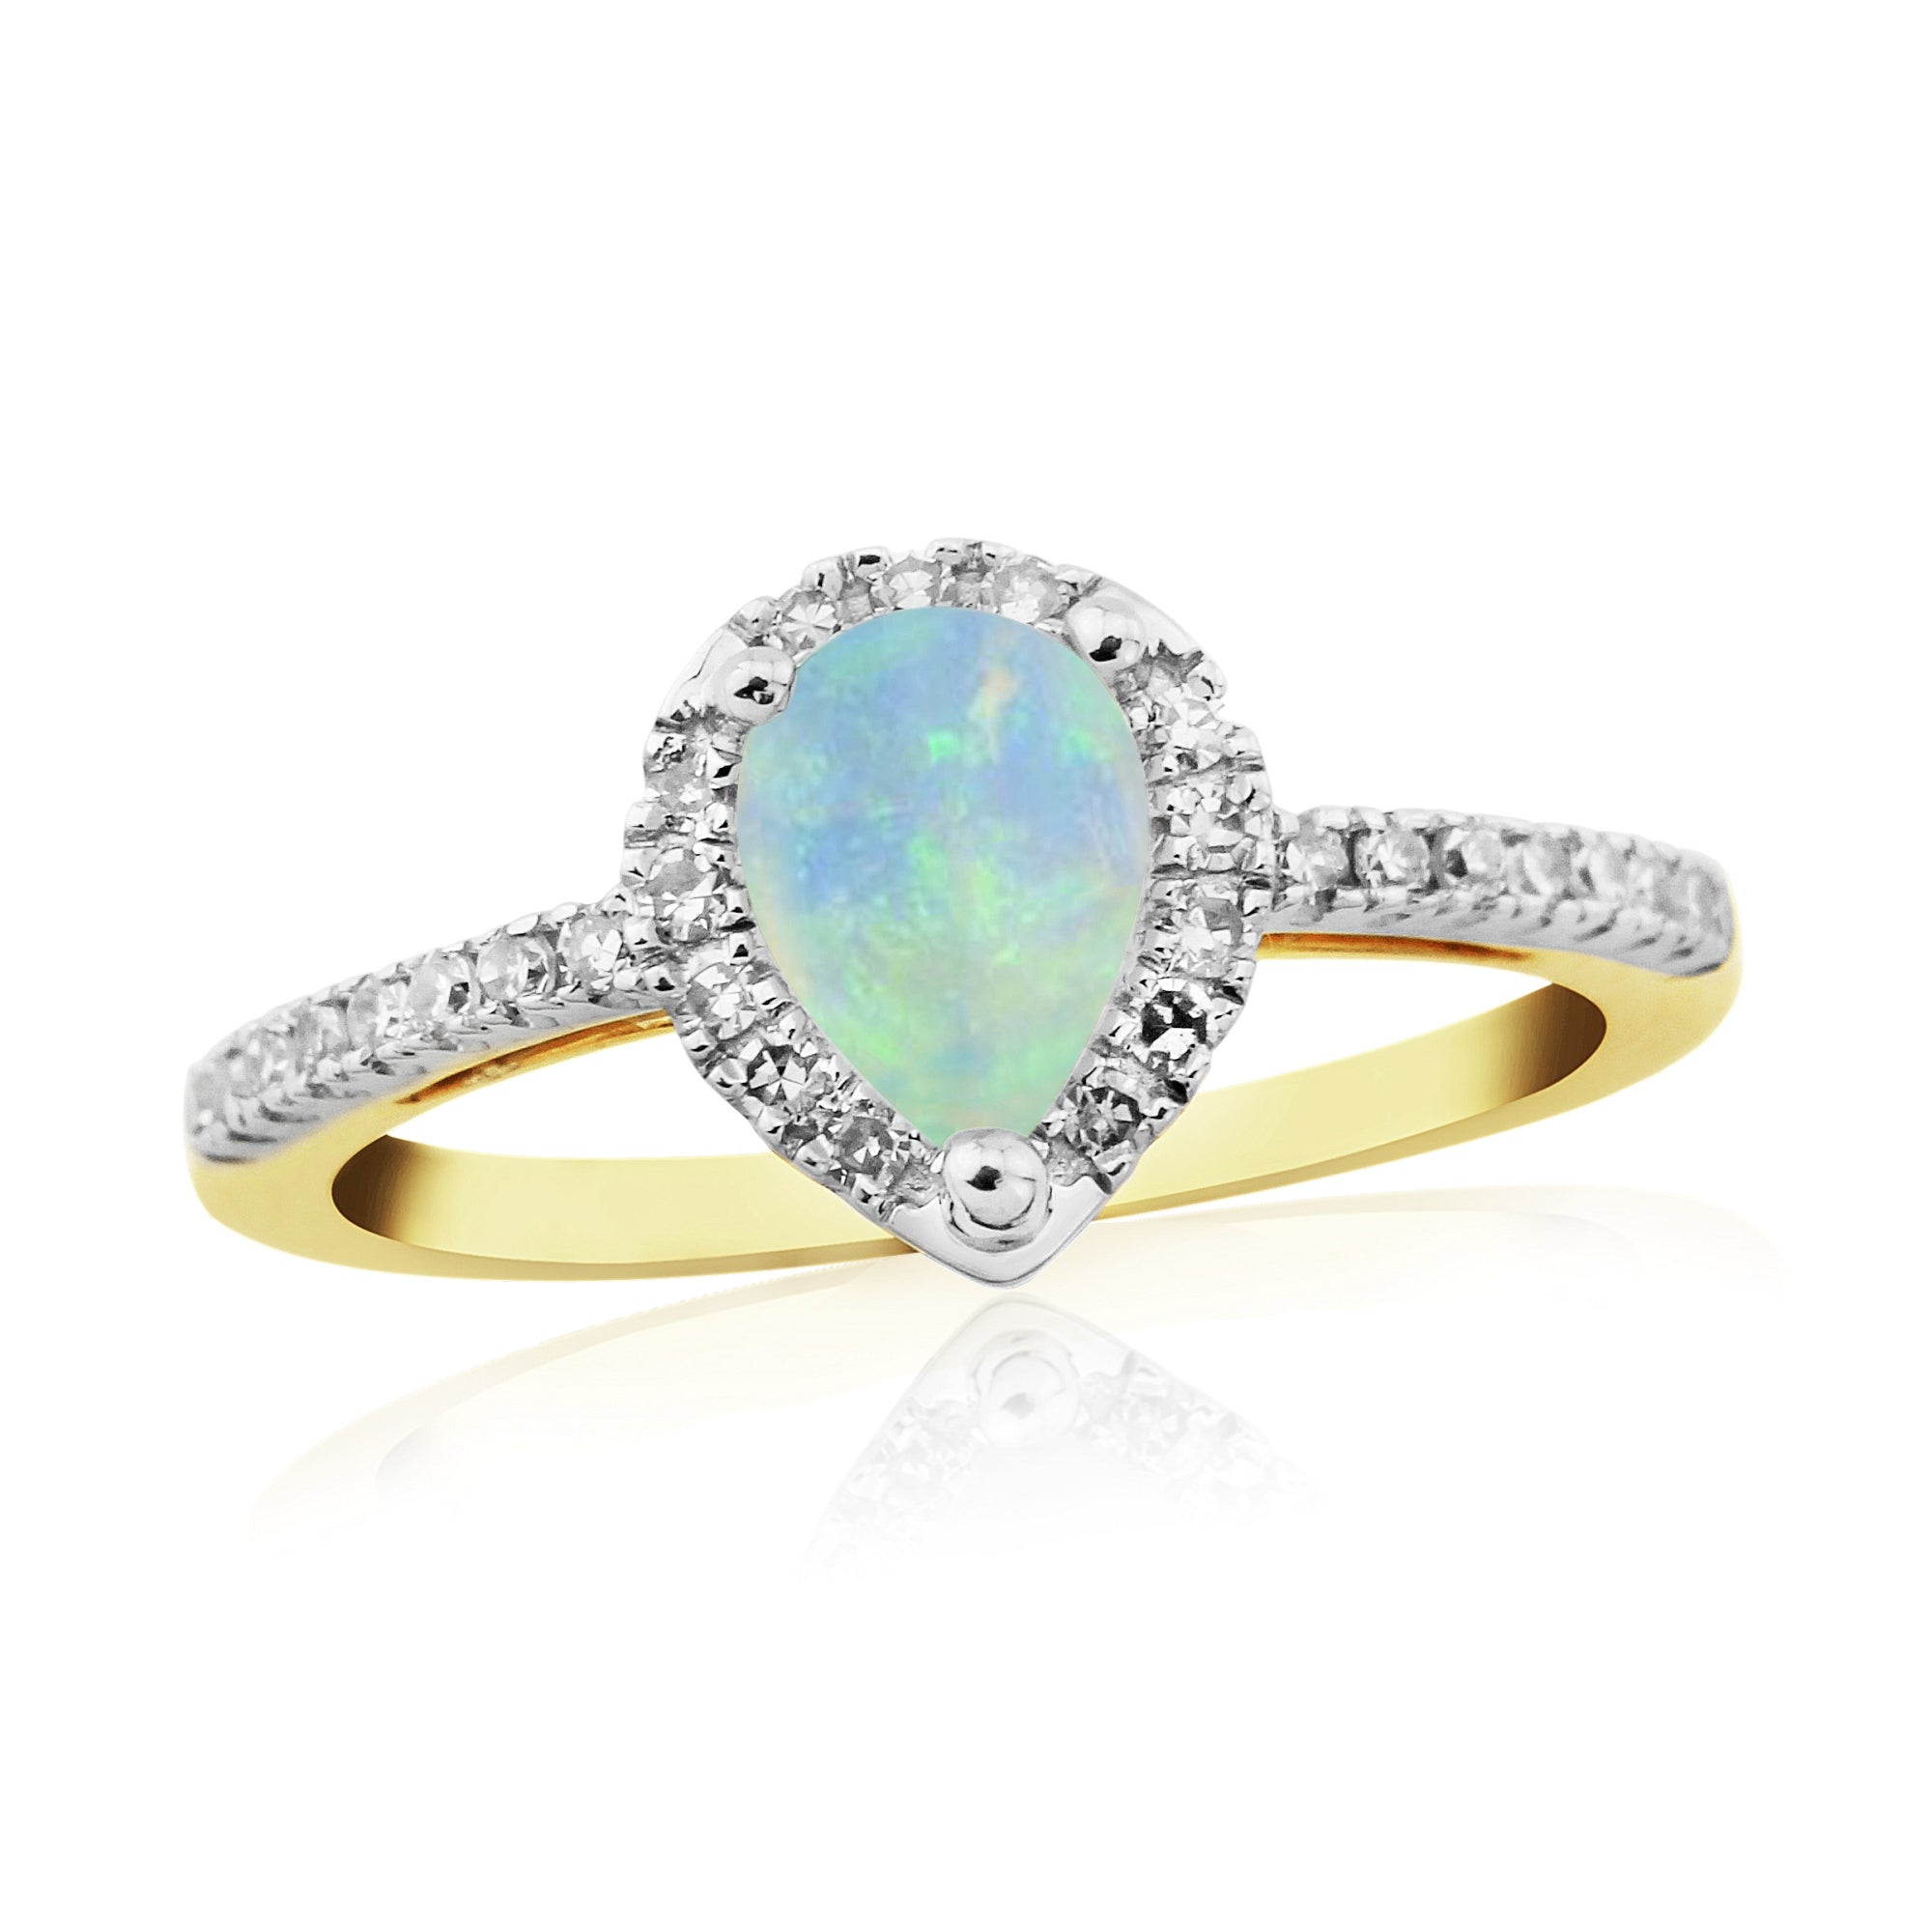 9ct gold 7x5mm pear shape opal & diamond cluster ring with diamond set shoulders 0.19ct